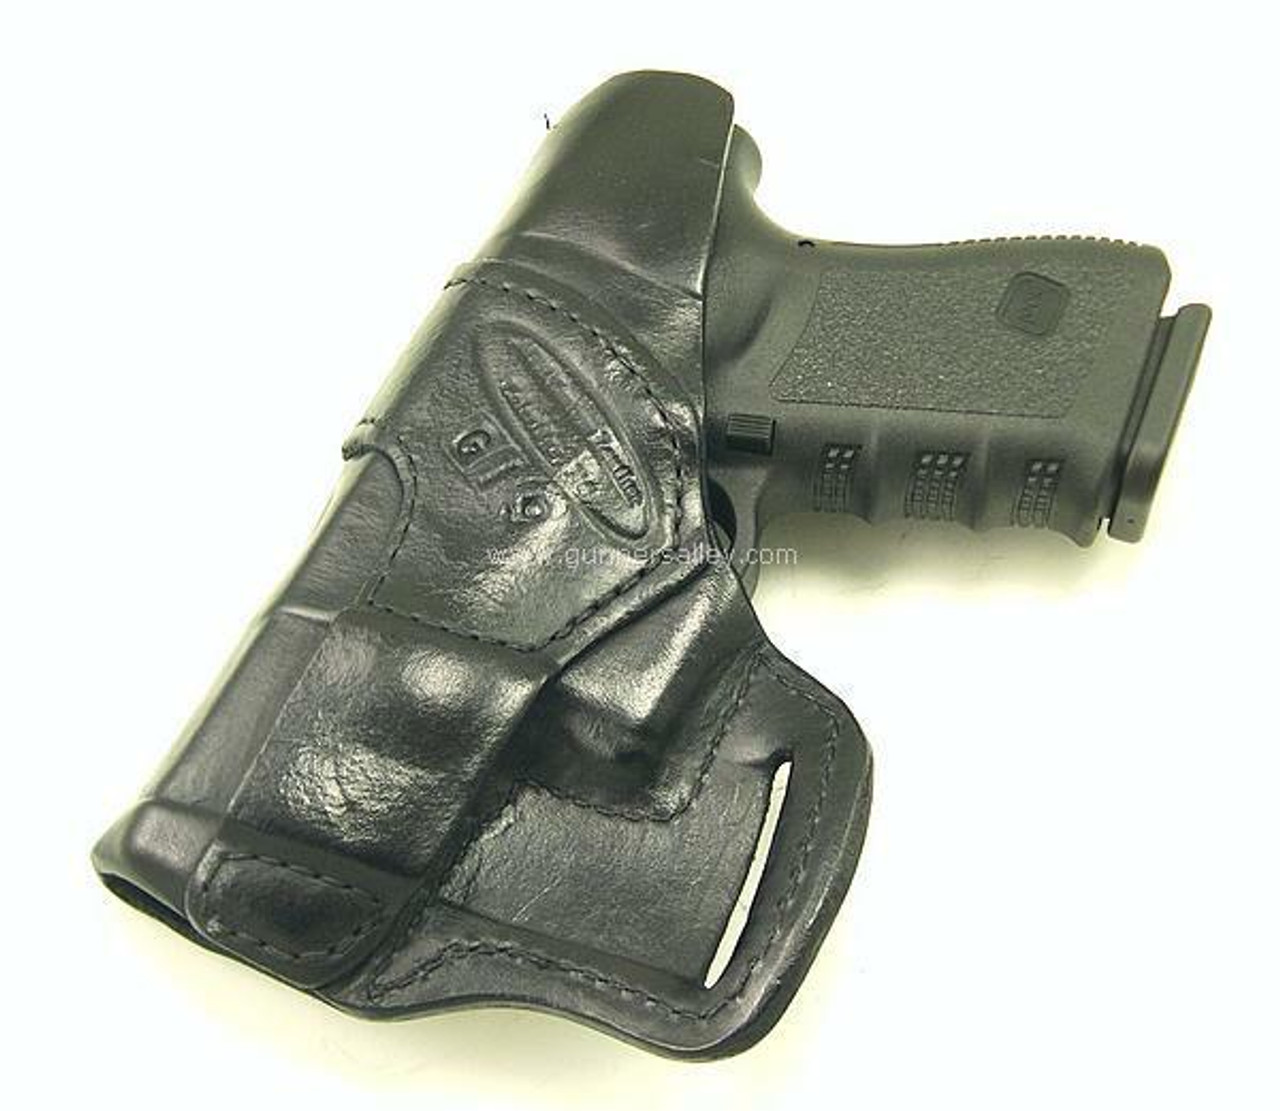 TR39G for Ruger LCP Max-TR39G